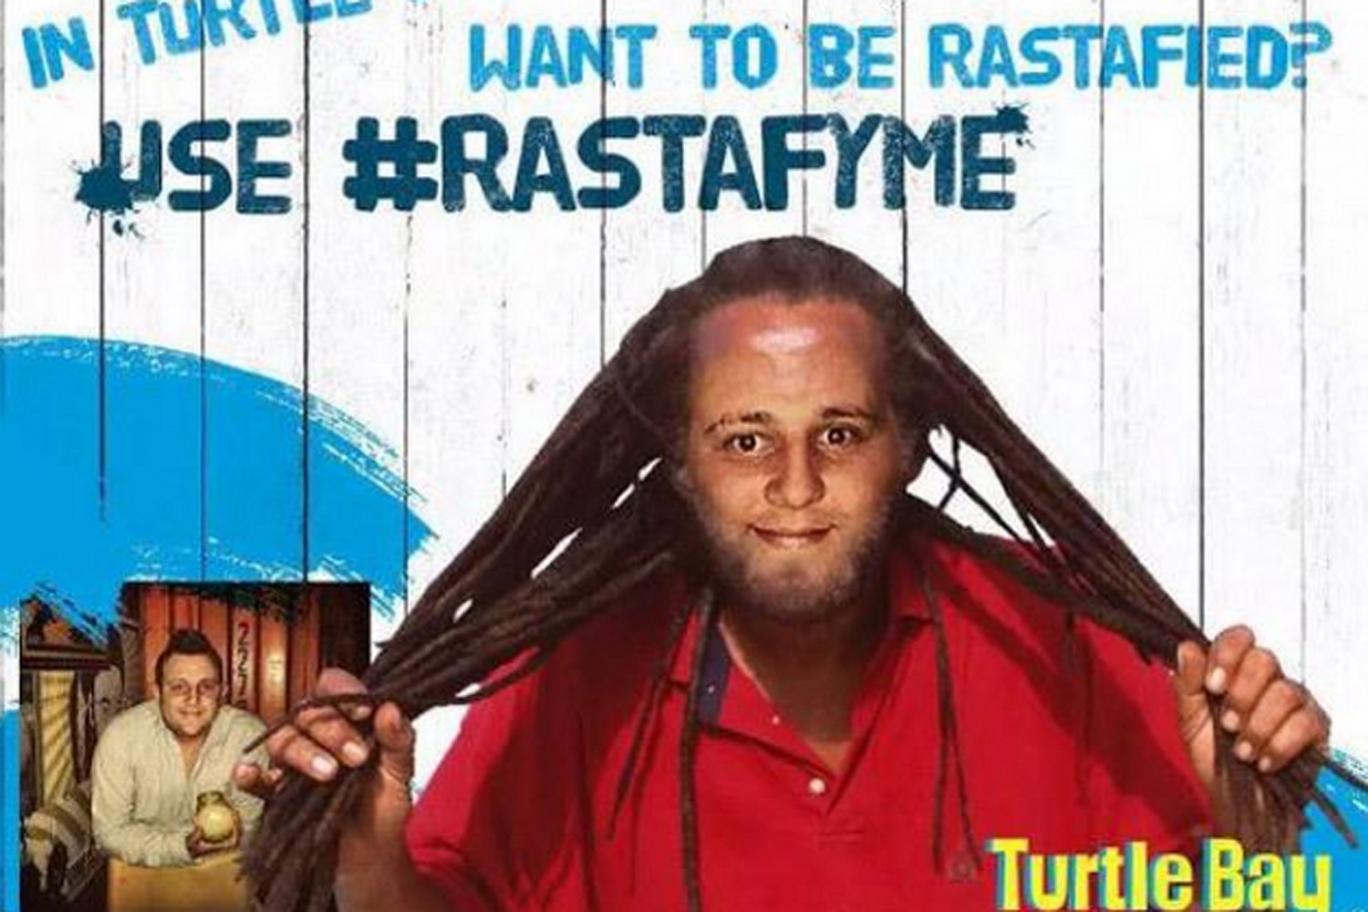 Turtle Bay's #rastafyme campaign was a spectacular backfire. Photo: Twitter